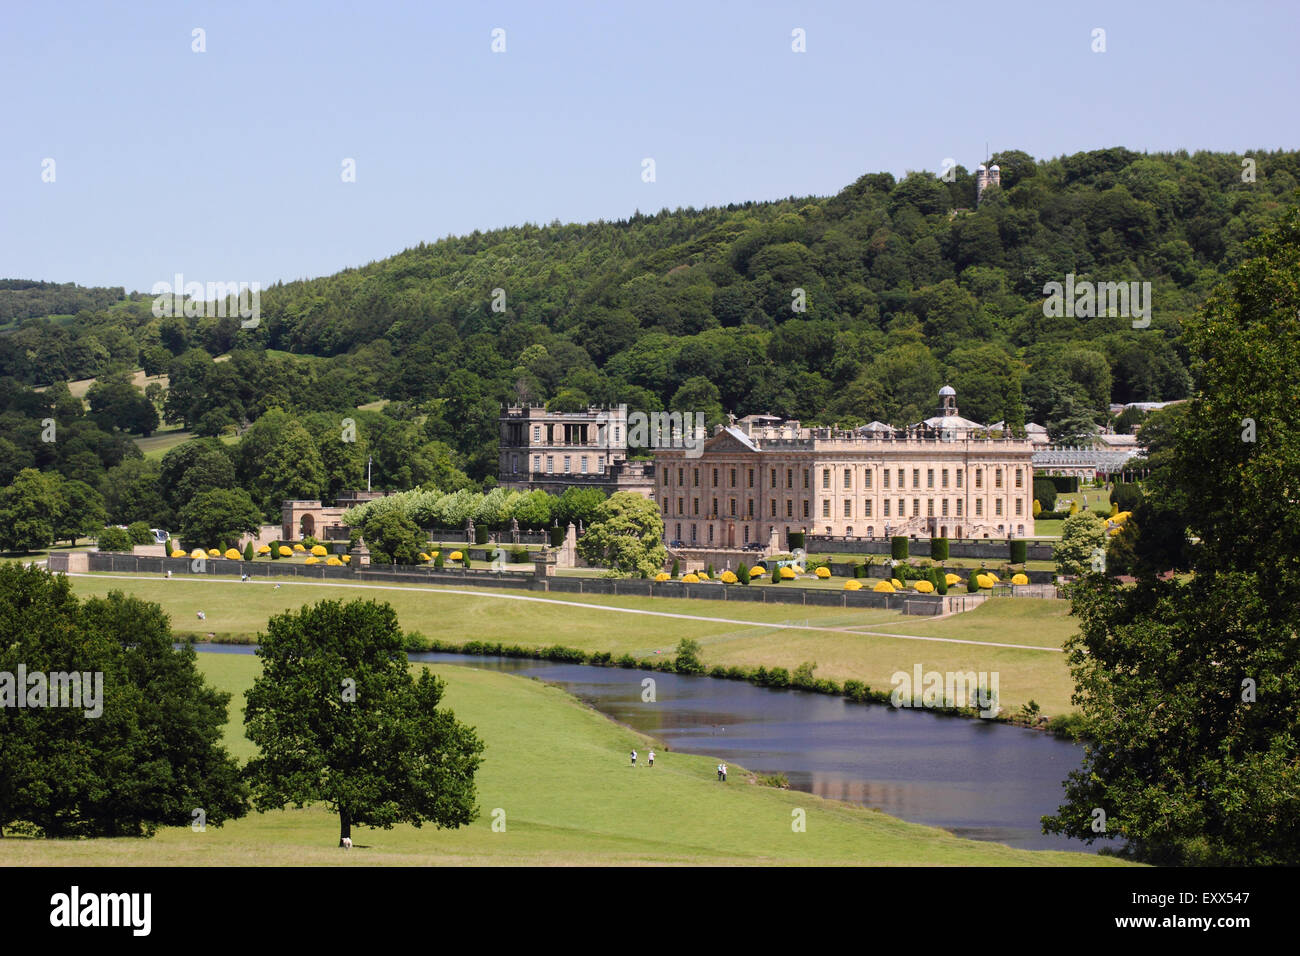 Derbyshre stately home, Chatsworth House in the Peak District National Park, England UK Stock Photo